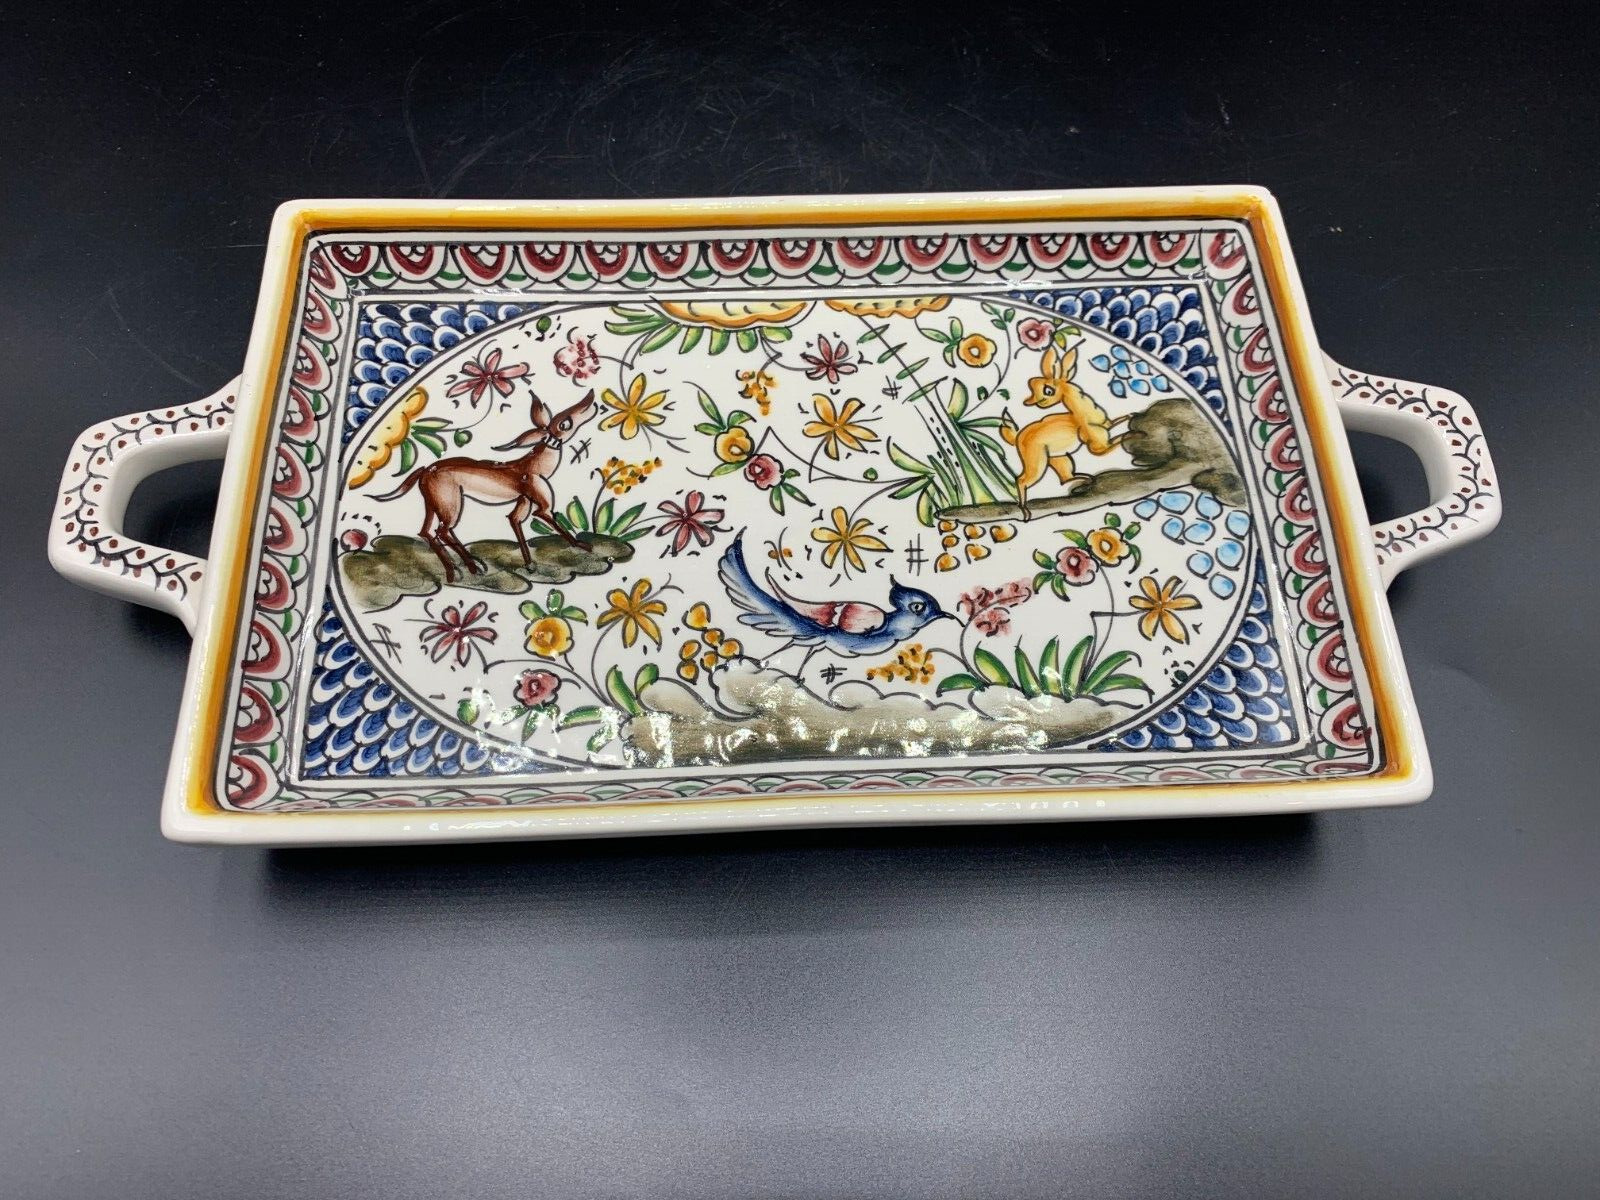 Vintage Hand Painted Real Ceramica Portugal Ceramic Serving Tray Floral and Deer